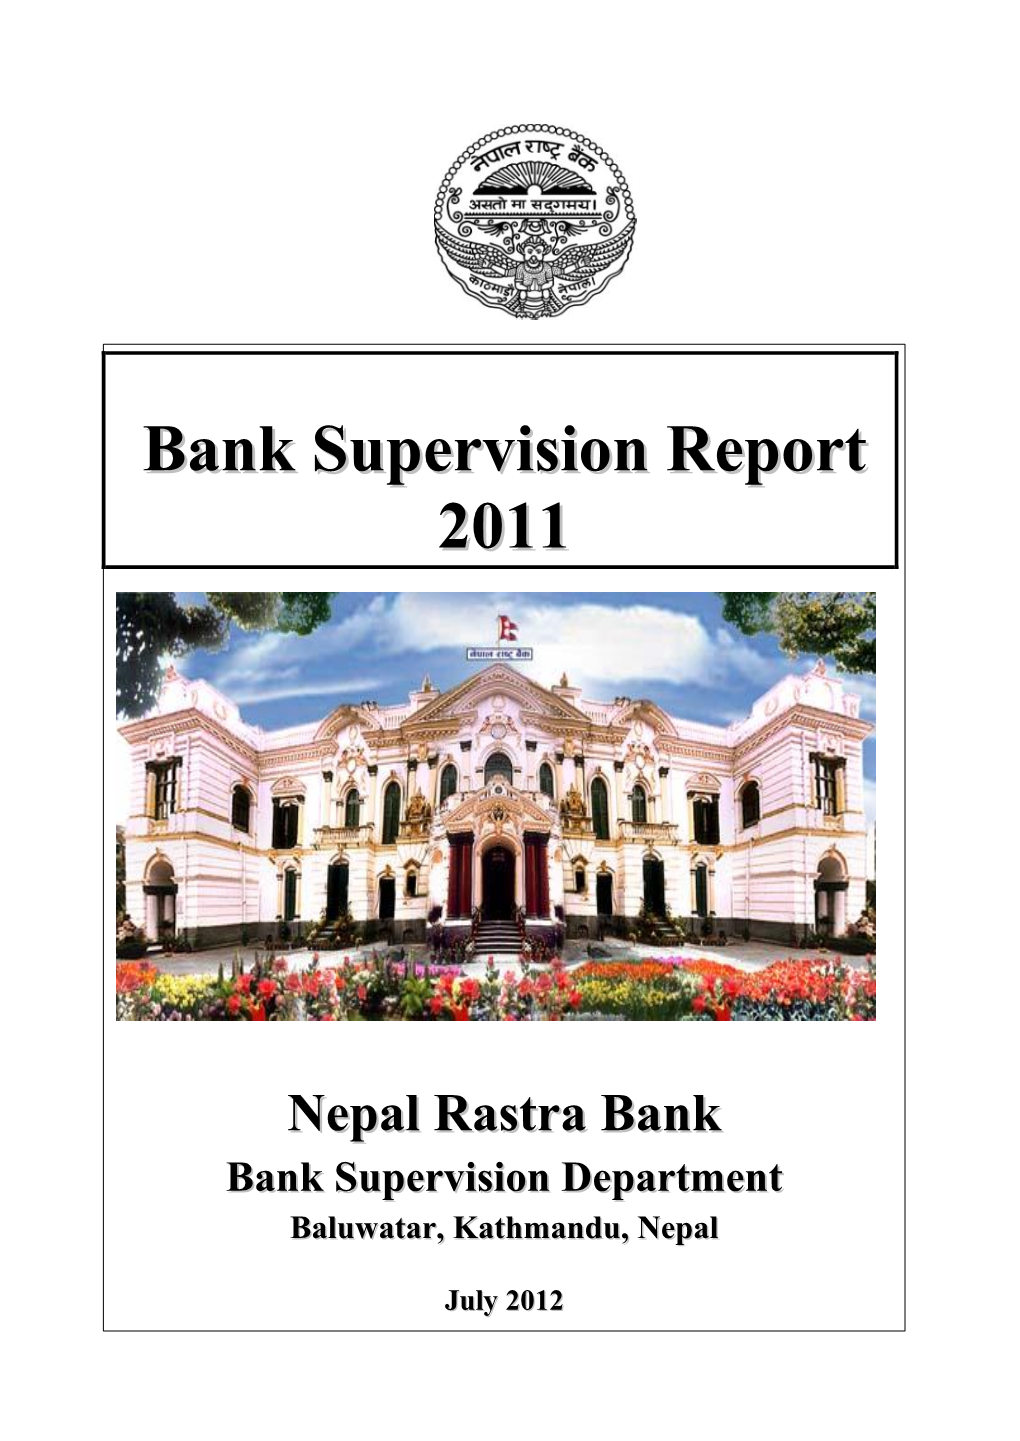 Annual Bank Supervision Report 2011